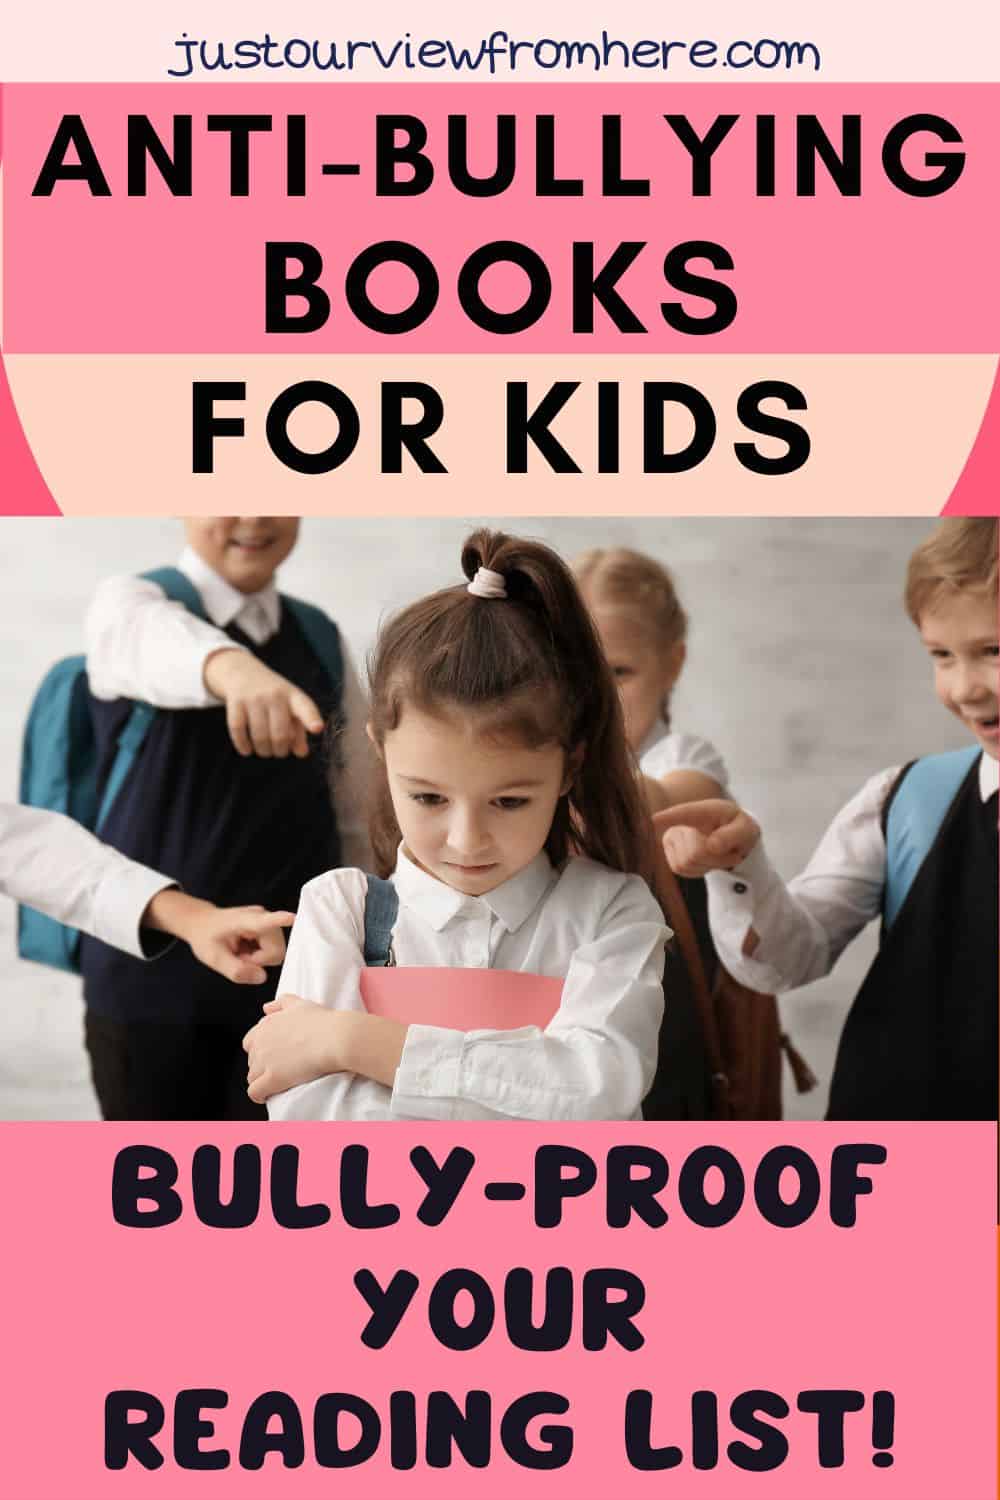 young girl looking sad and scared being bullied by classmates at school, text overlay anti-bullying books for kids bully-proof your reading list